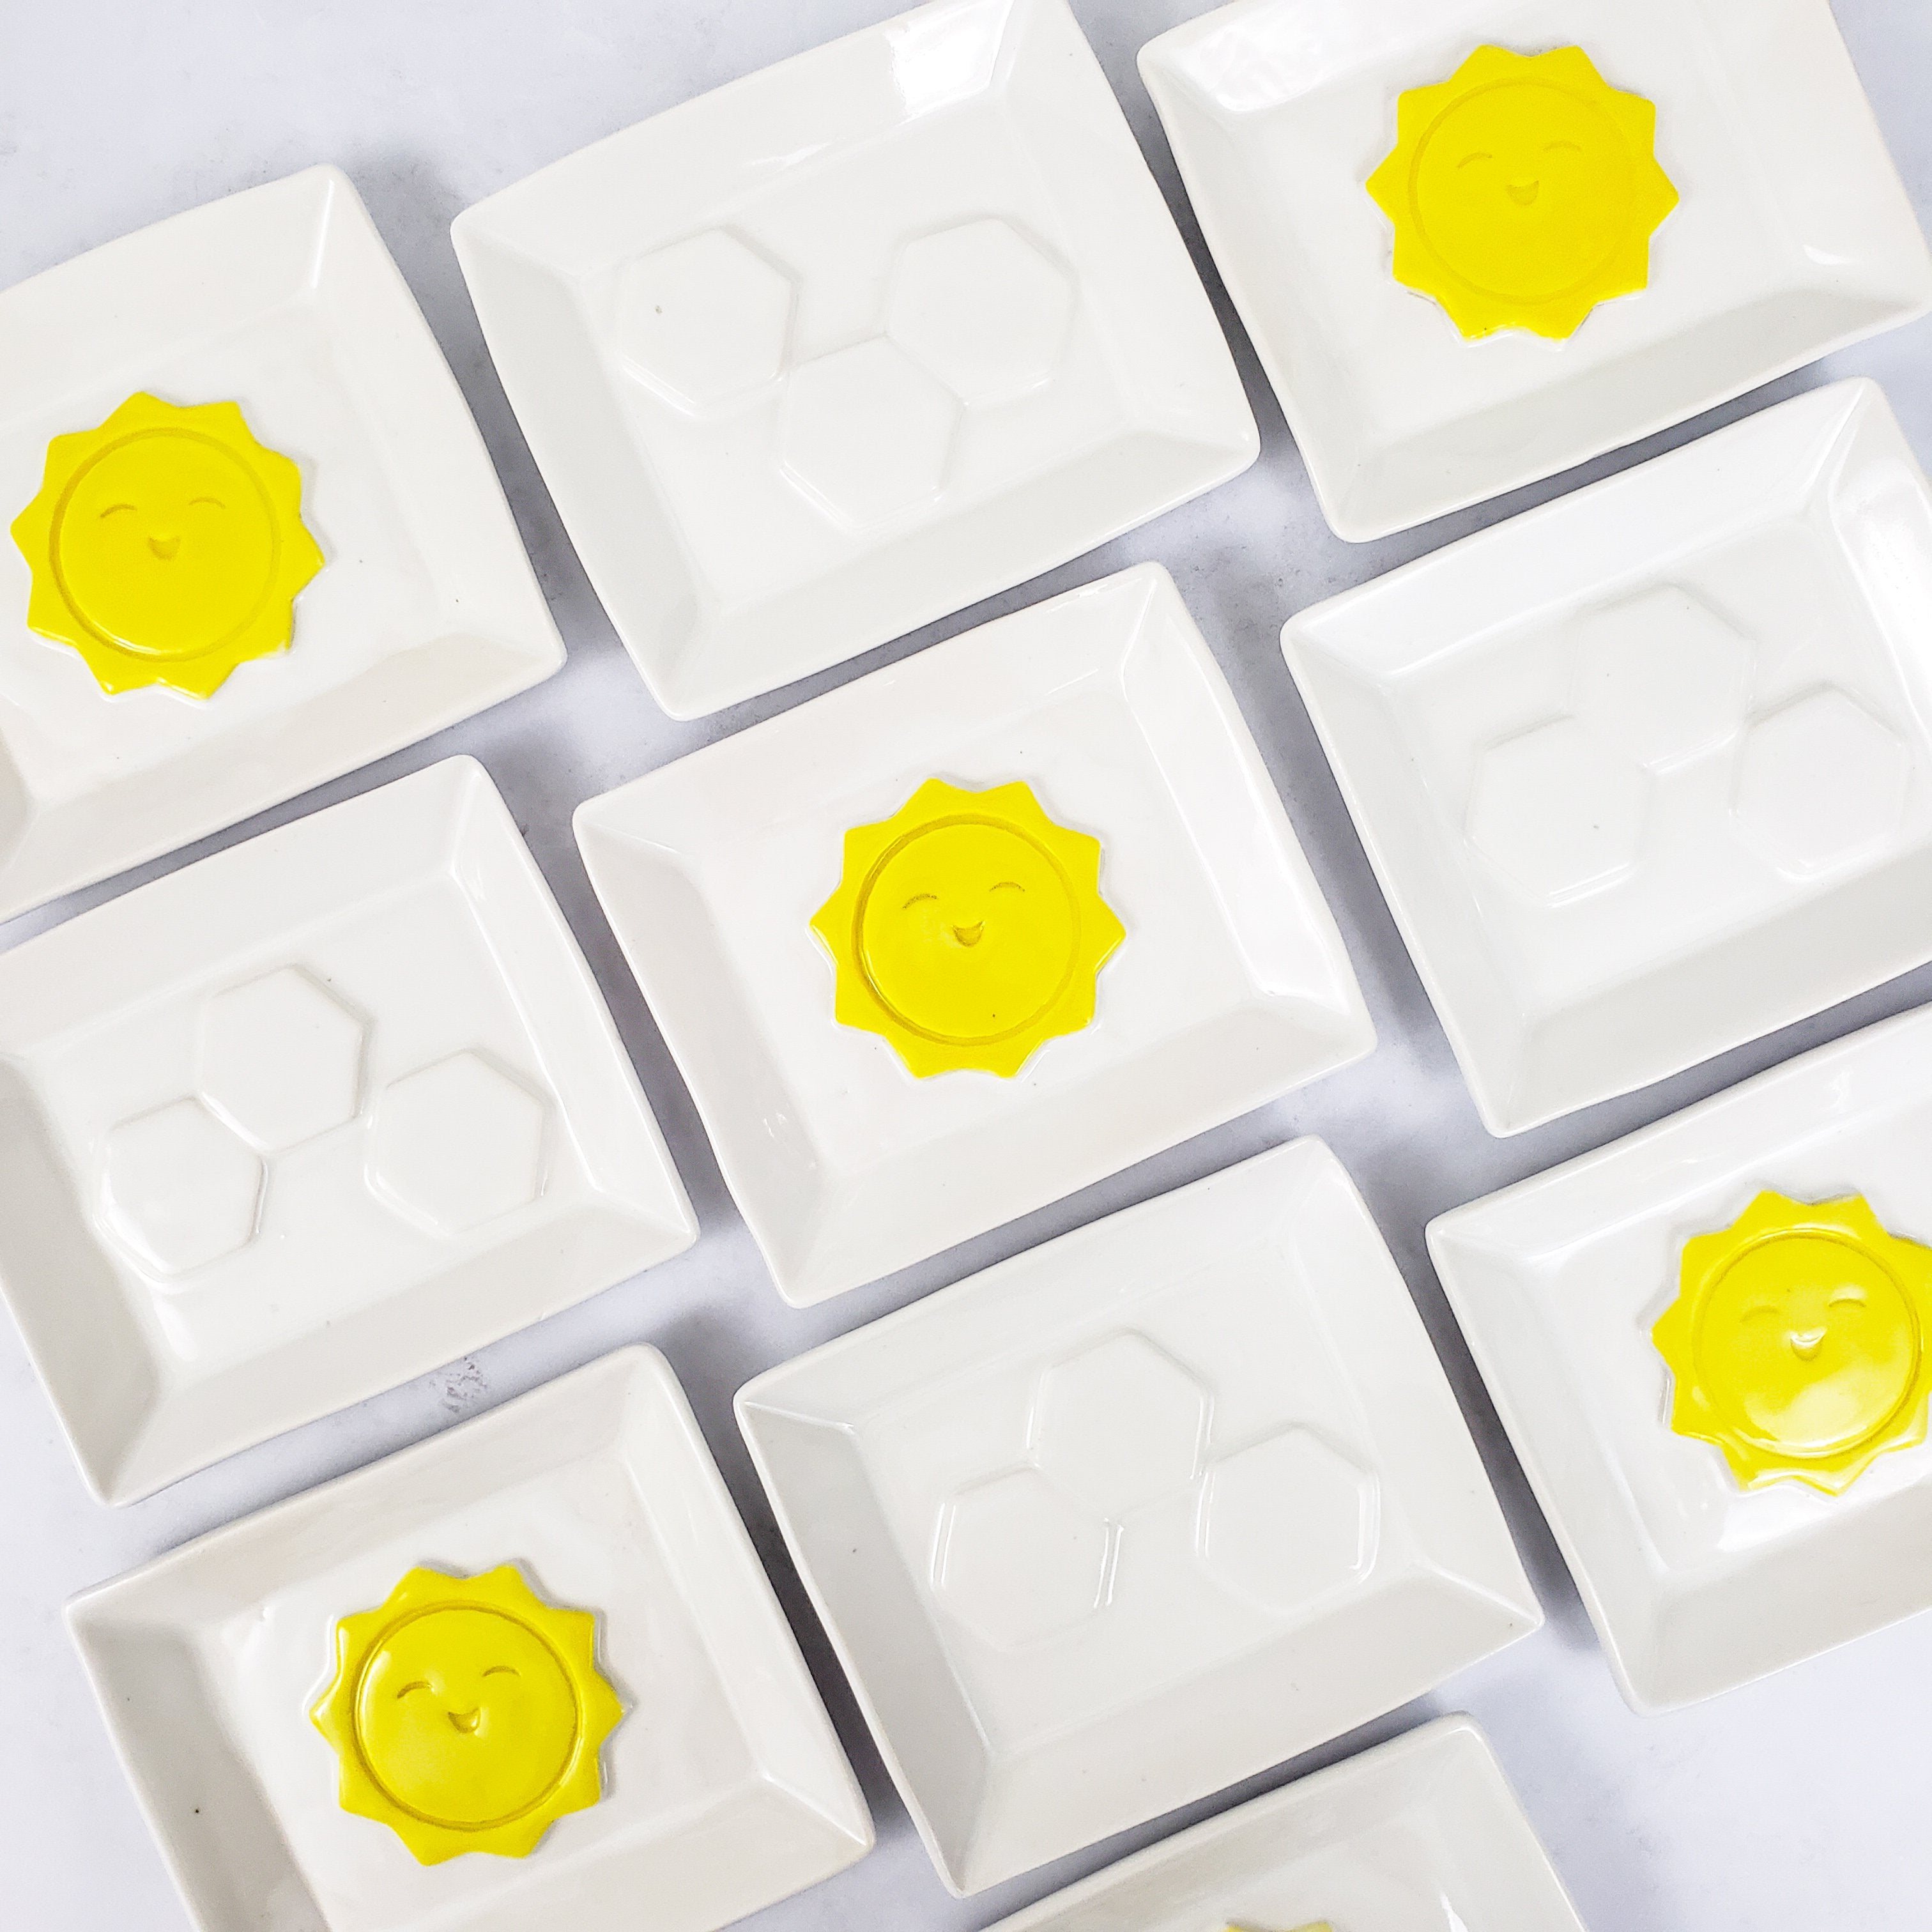 soap dishes in diagonal rows, alternating sunshines with hexagon designs